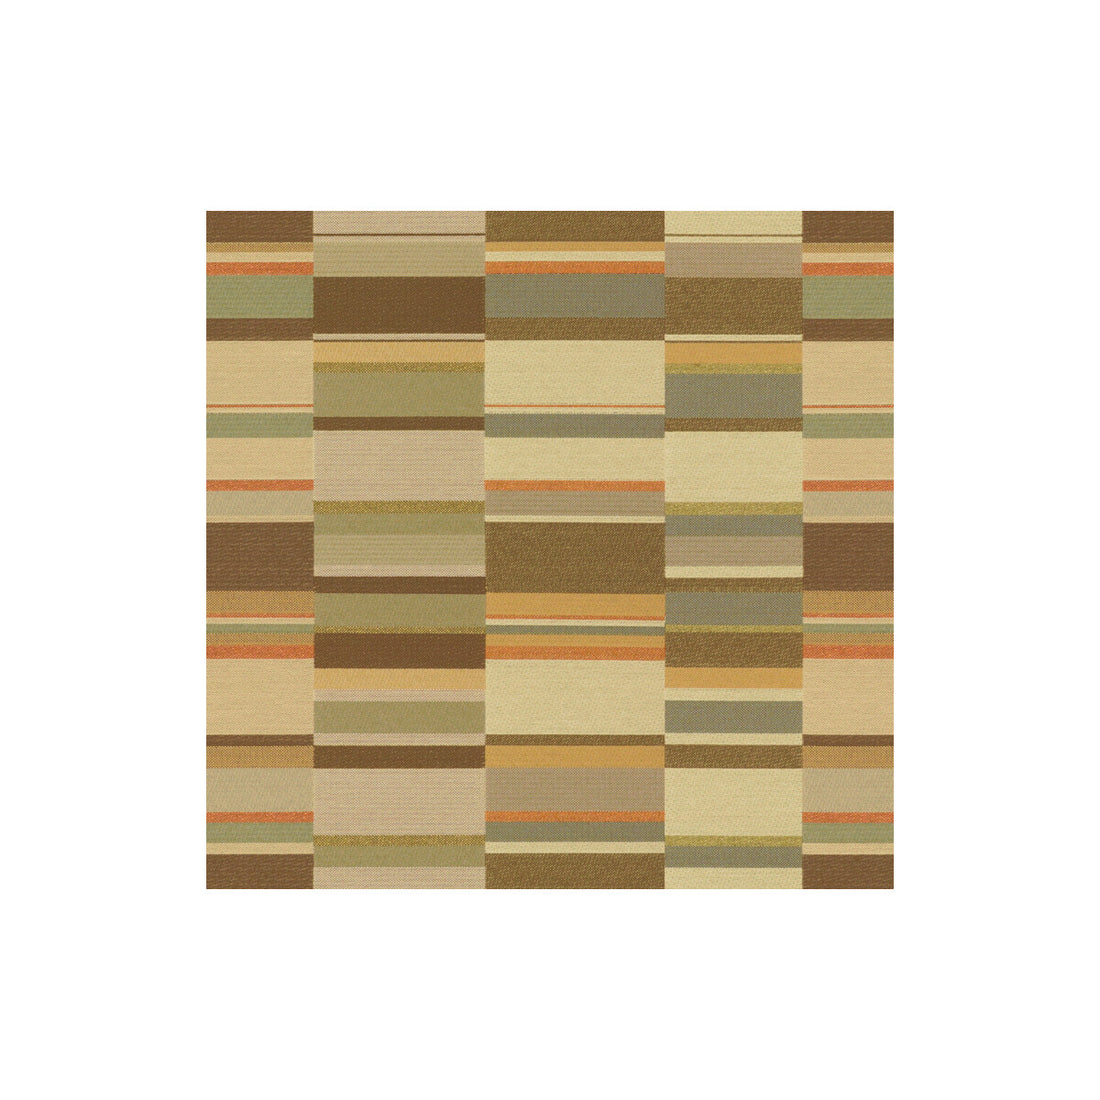 Nominate fabric in sandstone color - pattern 32925.611.0 - by Kravet Contract in the Contract Gis collection